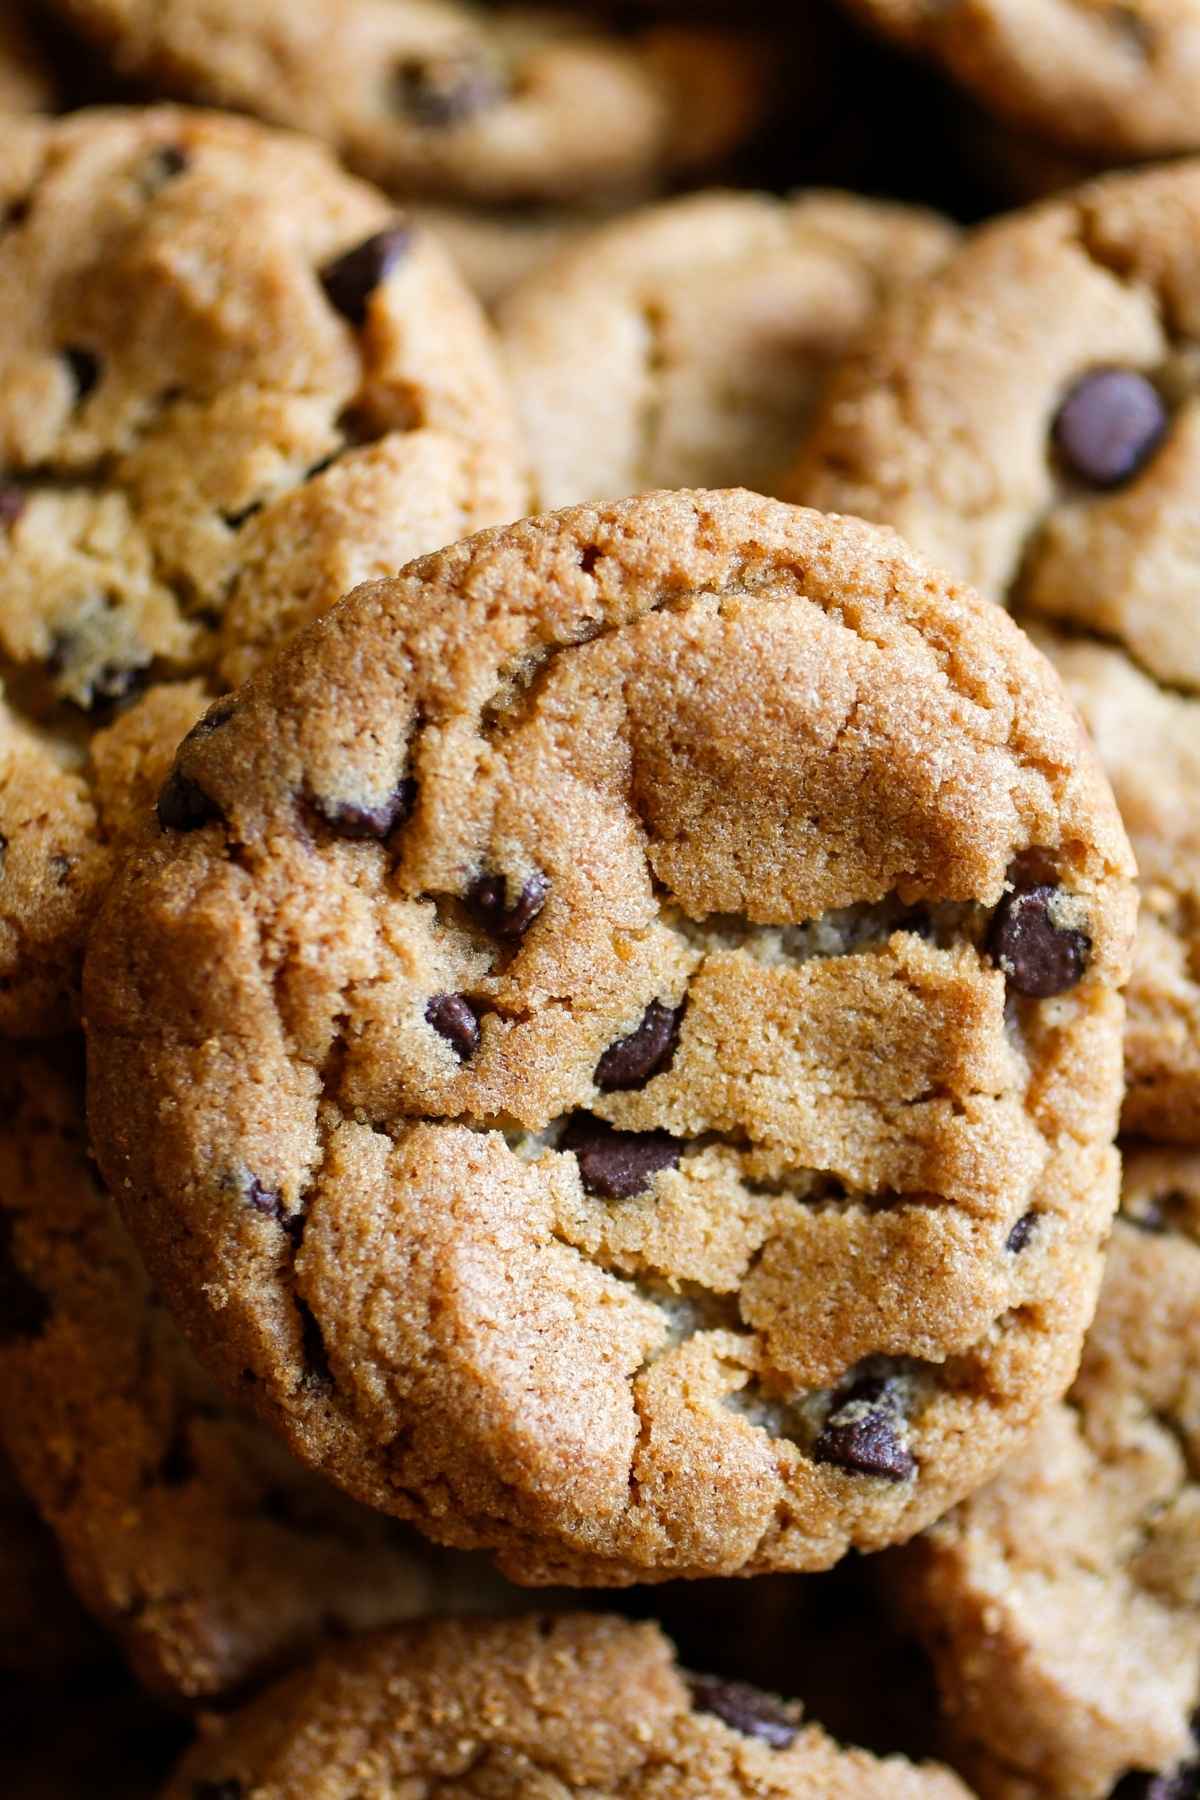 Whether your favorite cookie is chocolate chip, oatmeal raisin, or peanut butter, when they become hard, they’re just not appetizing. The good news is, there are some easy ways to soften up those cookies, giving you more time to enjoy them.